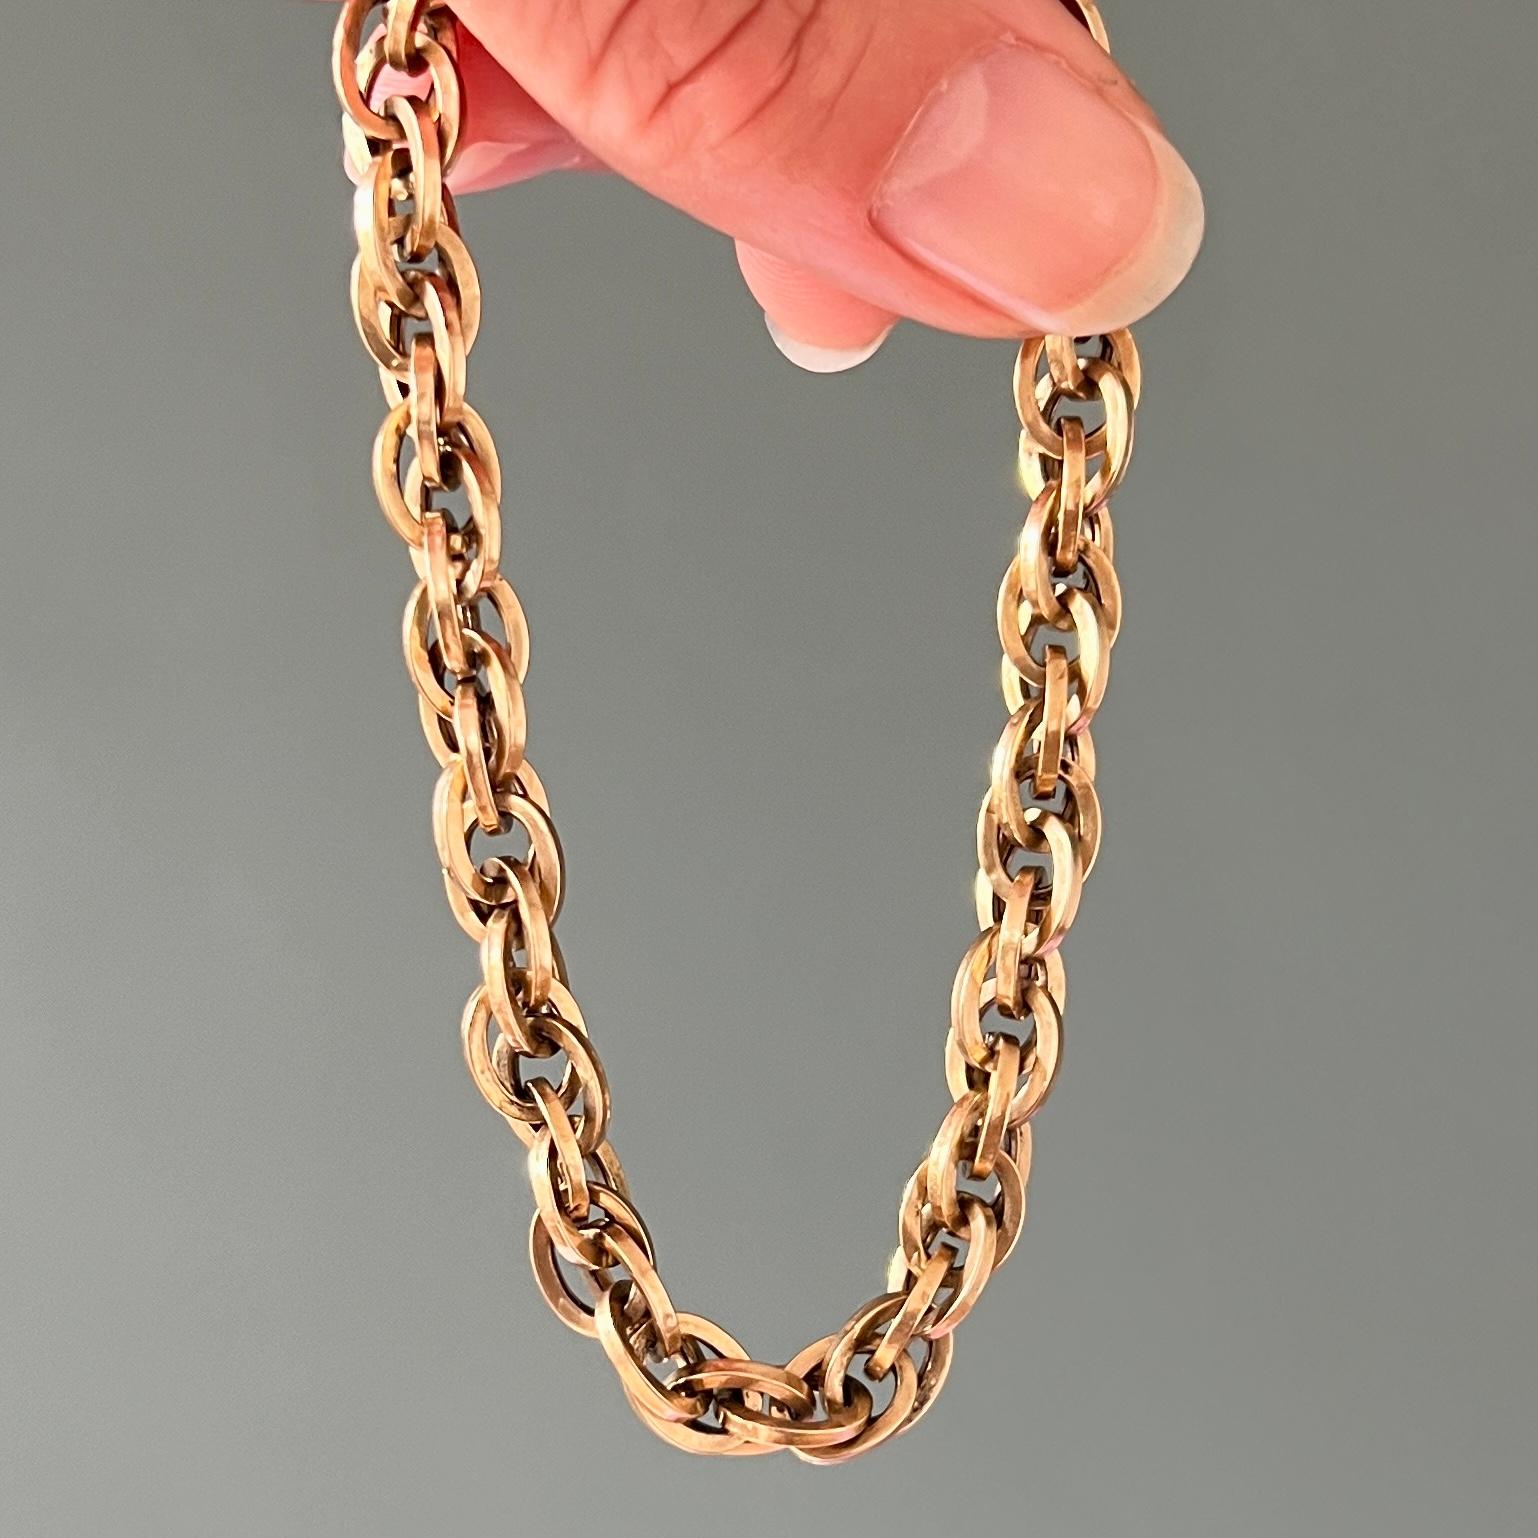 Vintage Italian 18 karat gold bracelet composed of oval-shaped links in the form of double hollow loops. This exceptional, fine and impressive bracelet has been created in 18 karat yellow gold. The multi-dimensional articulated bracelet consists of